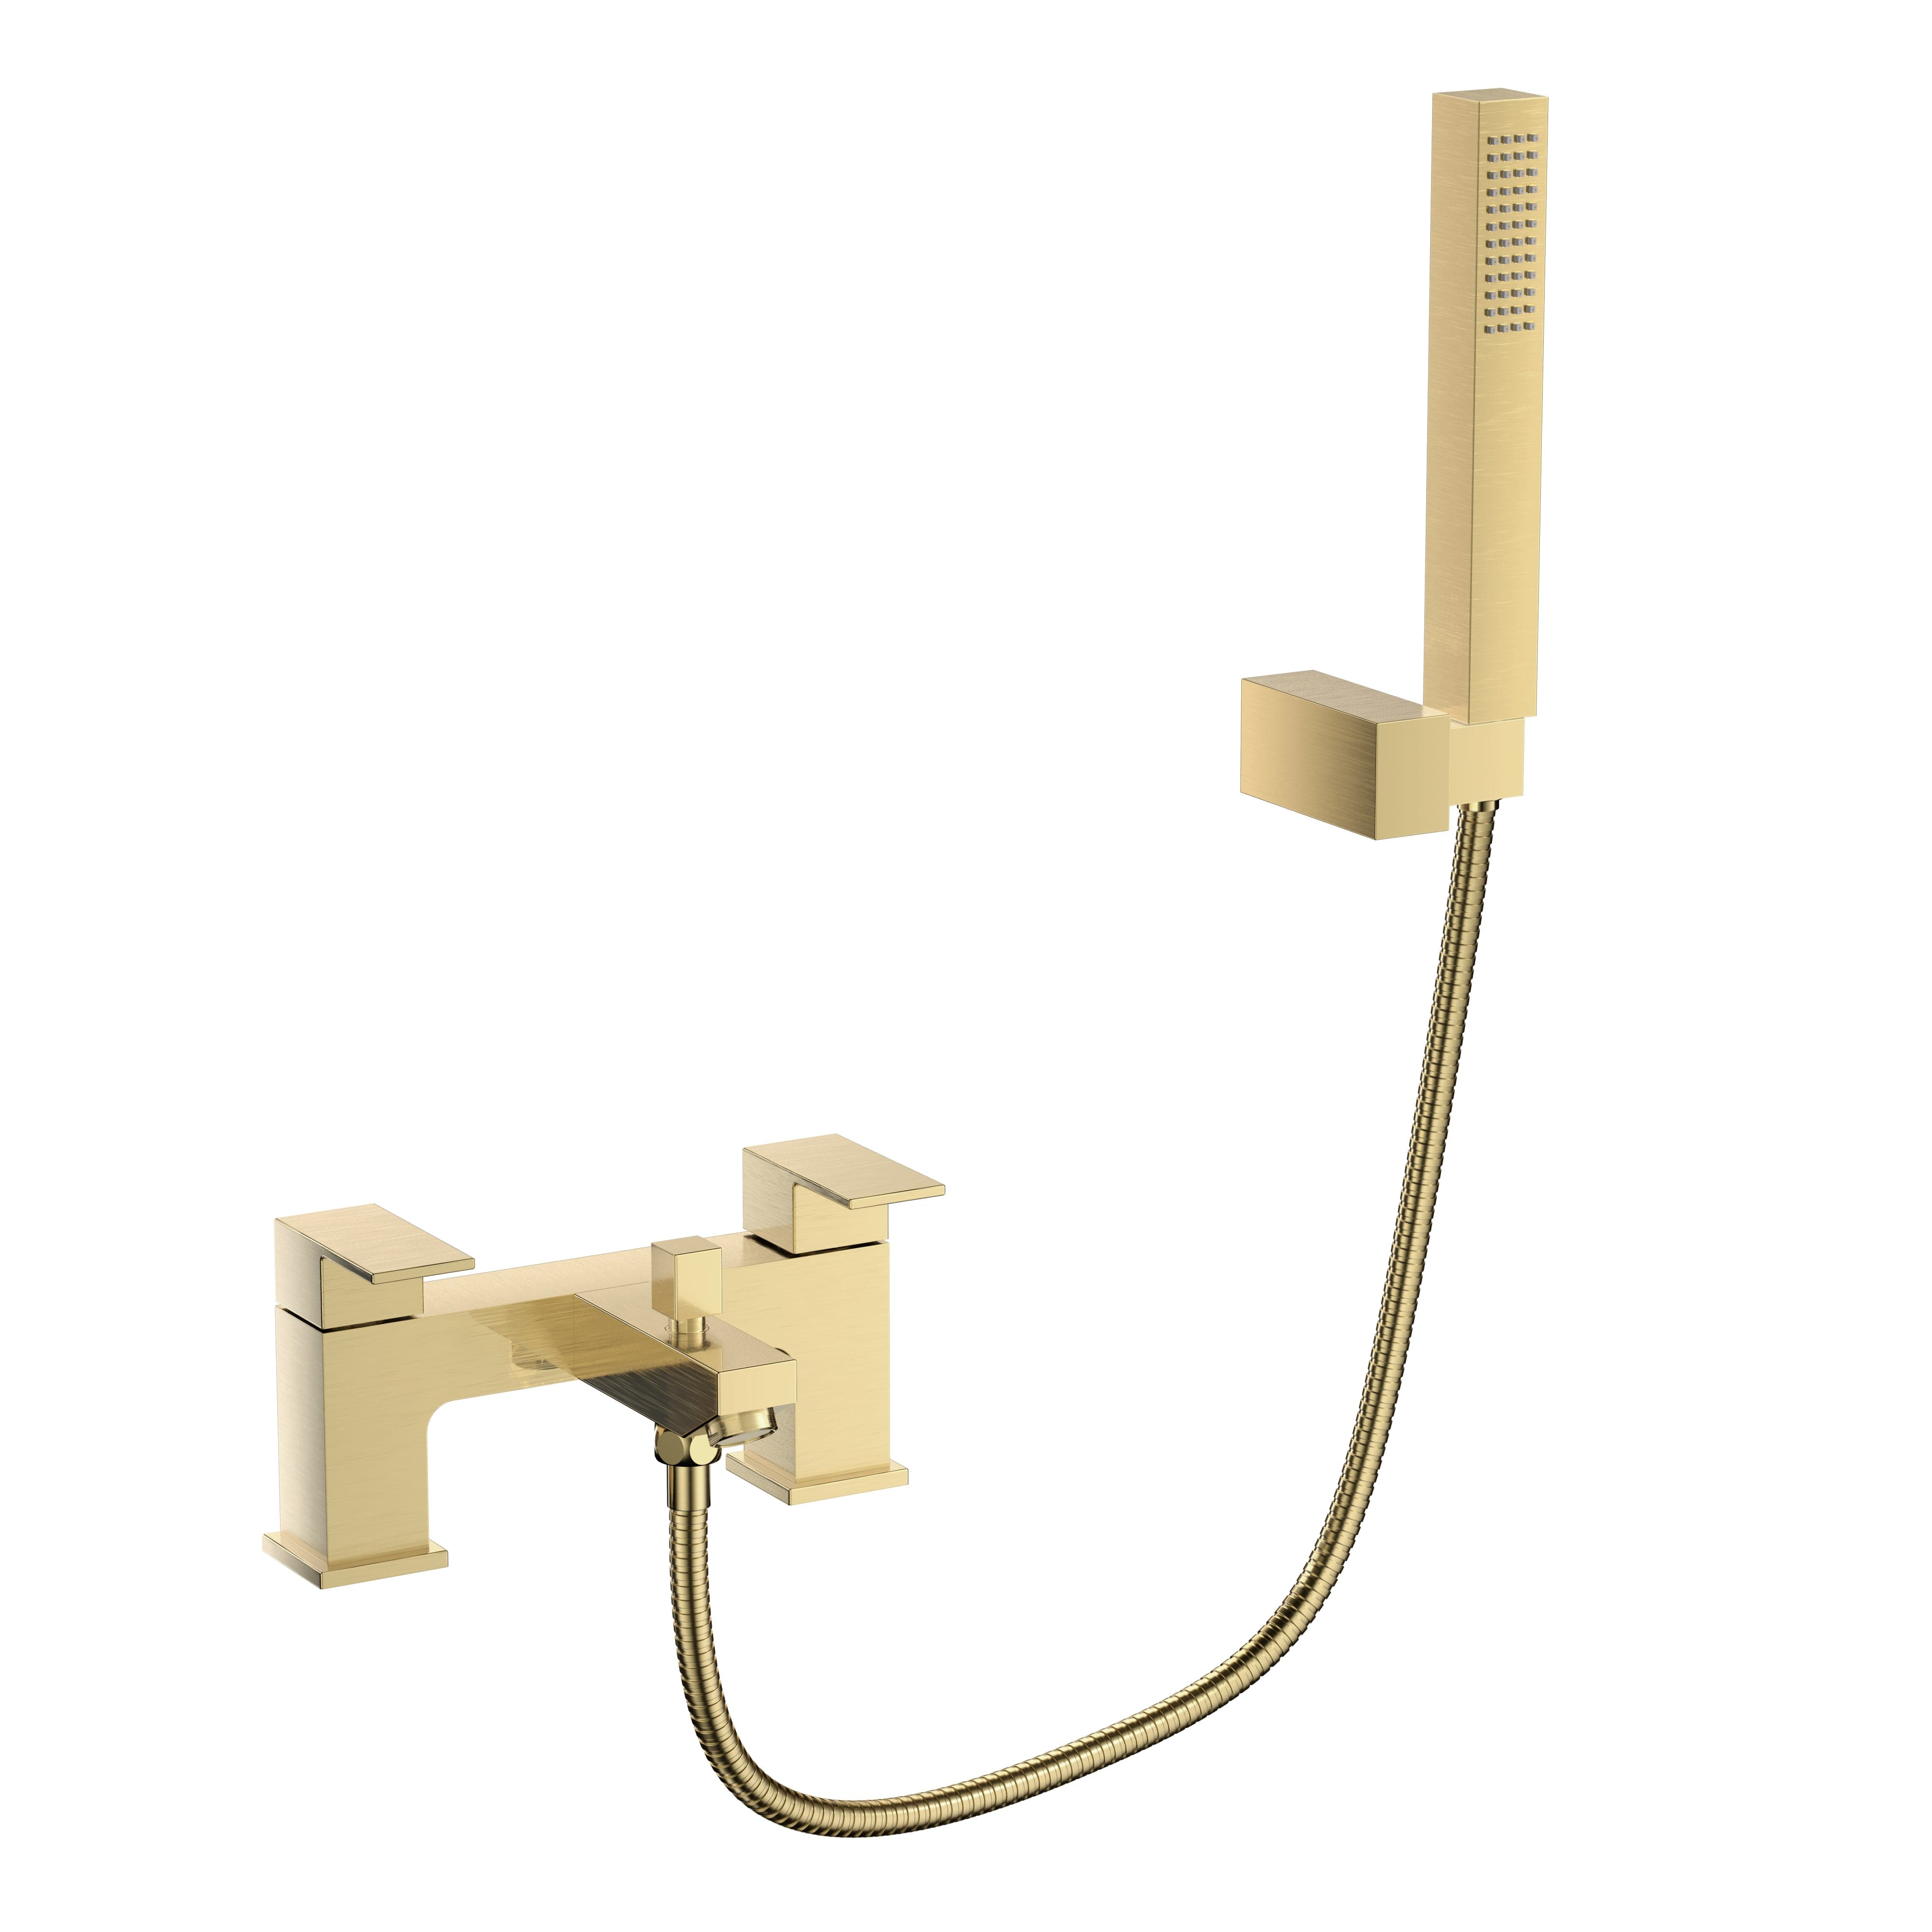 Munro Bath Shower Mixer Tap with Kit in Brushed Brass finish, elegant bathroom accessory. Buy now for stylish renovations.